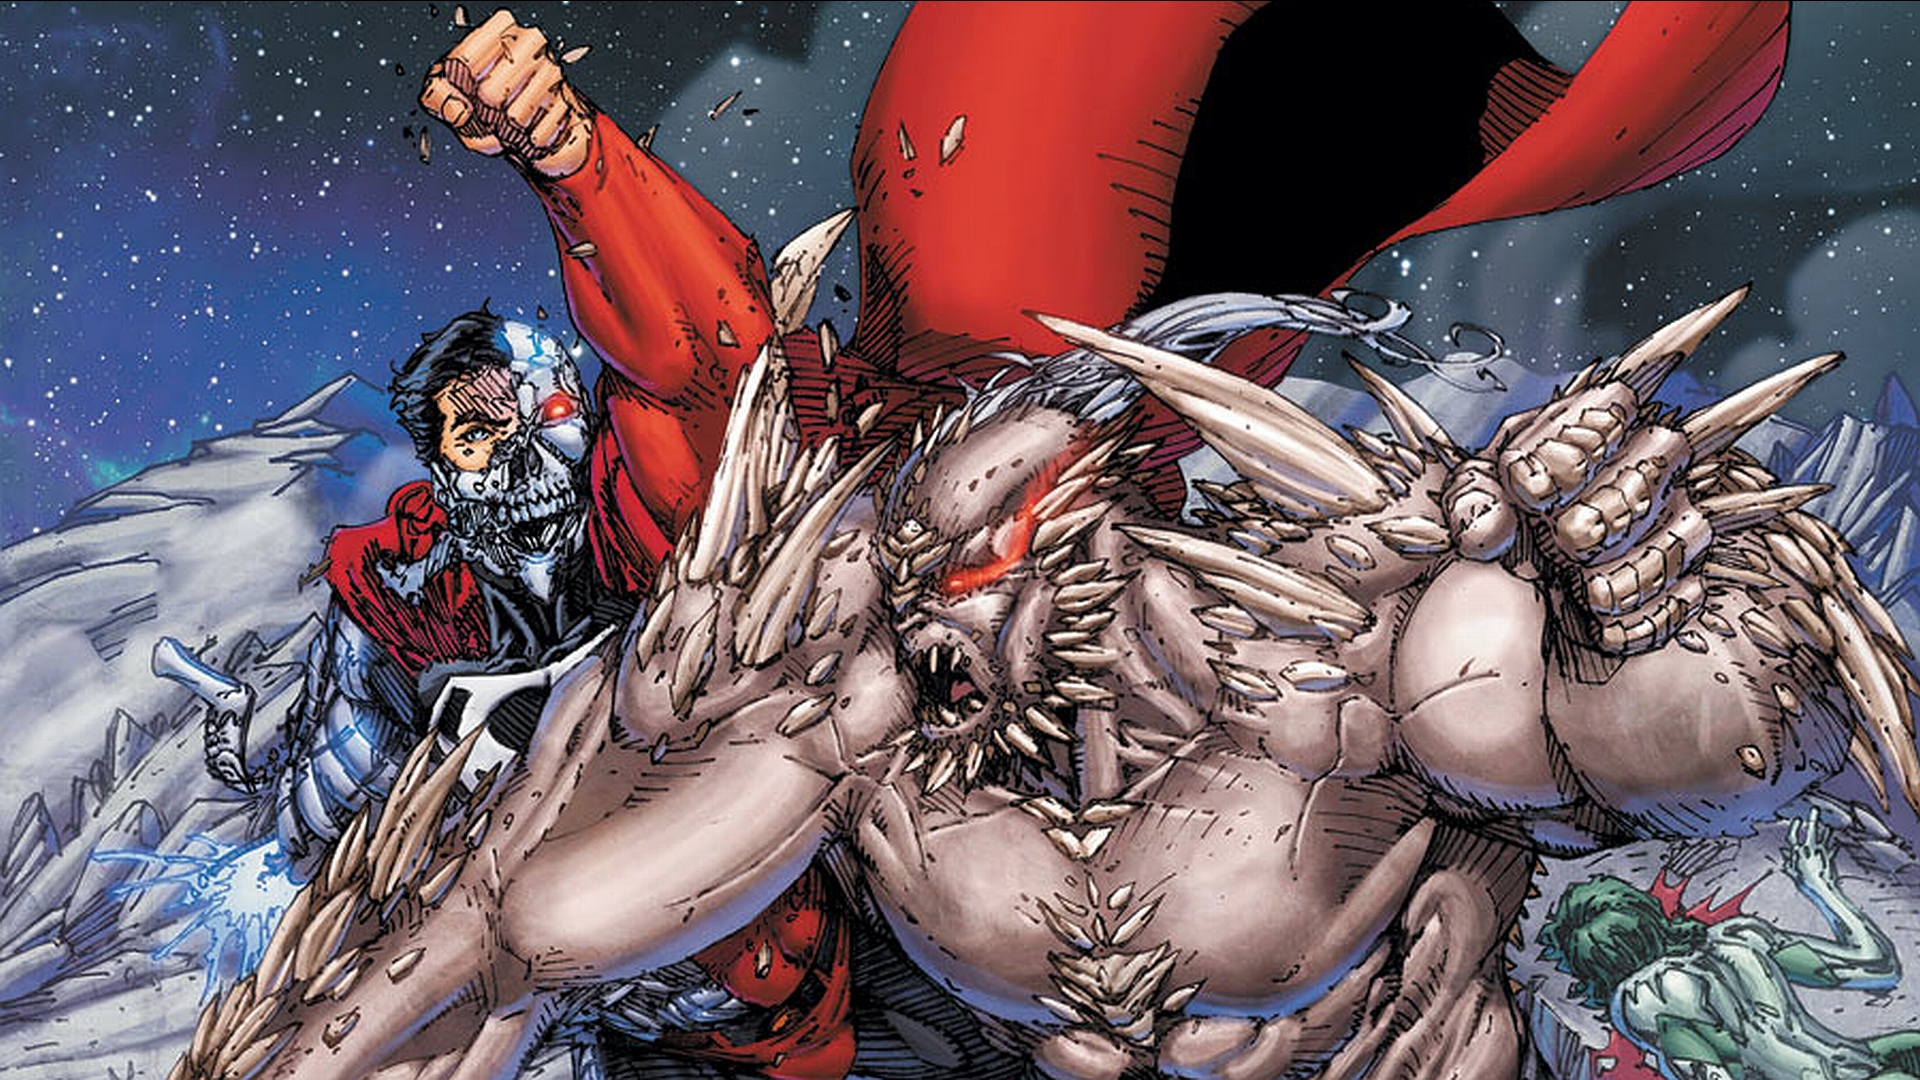 Doomsday (Dc Comics) wallpaper for desktop, download free Doomsday (Dc Comics) picture and background for PC